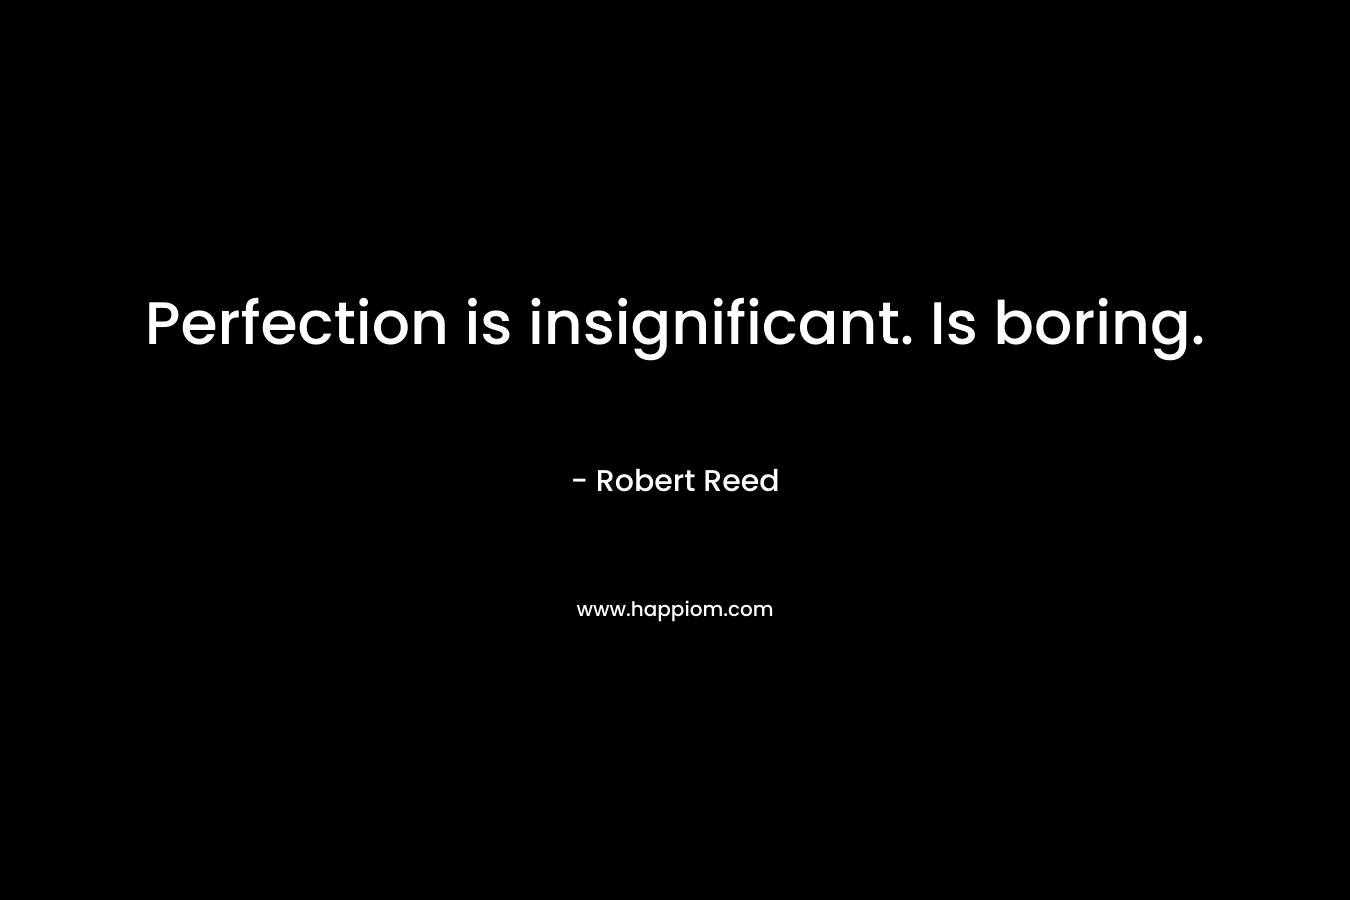 Perfection is insignificant. Is boring. – Robert Reed